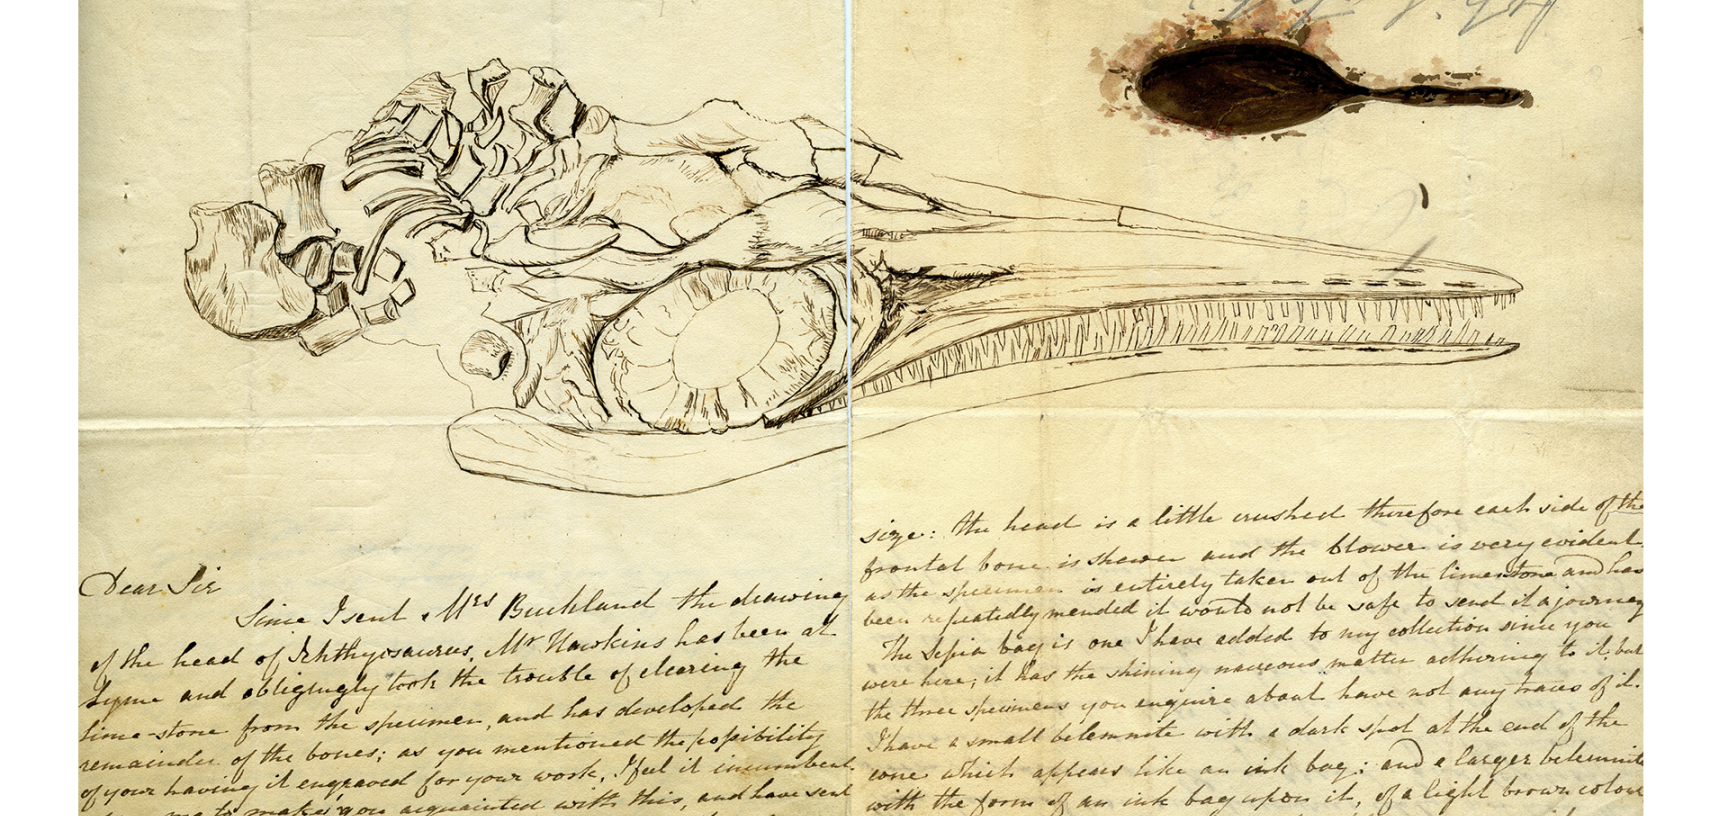 A letter from Elizabeth Philpot to William Buckland, c. 1833, containing a sketch of the same ichthyosaur skull after preparation, and a fossil ink sac painted in fossil squid ink.